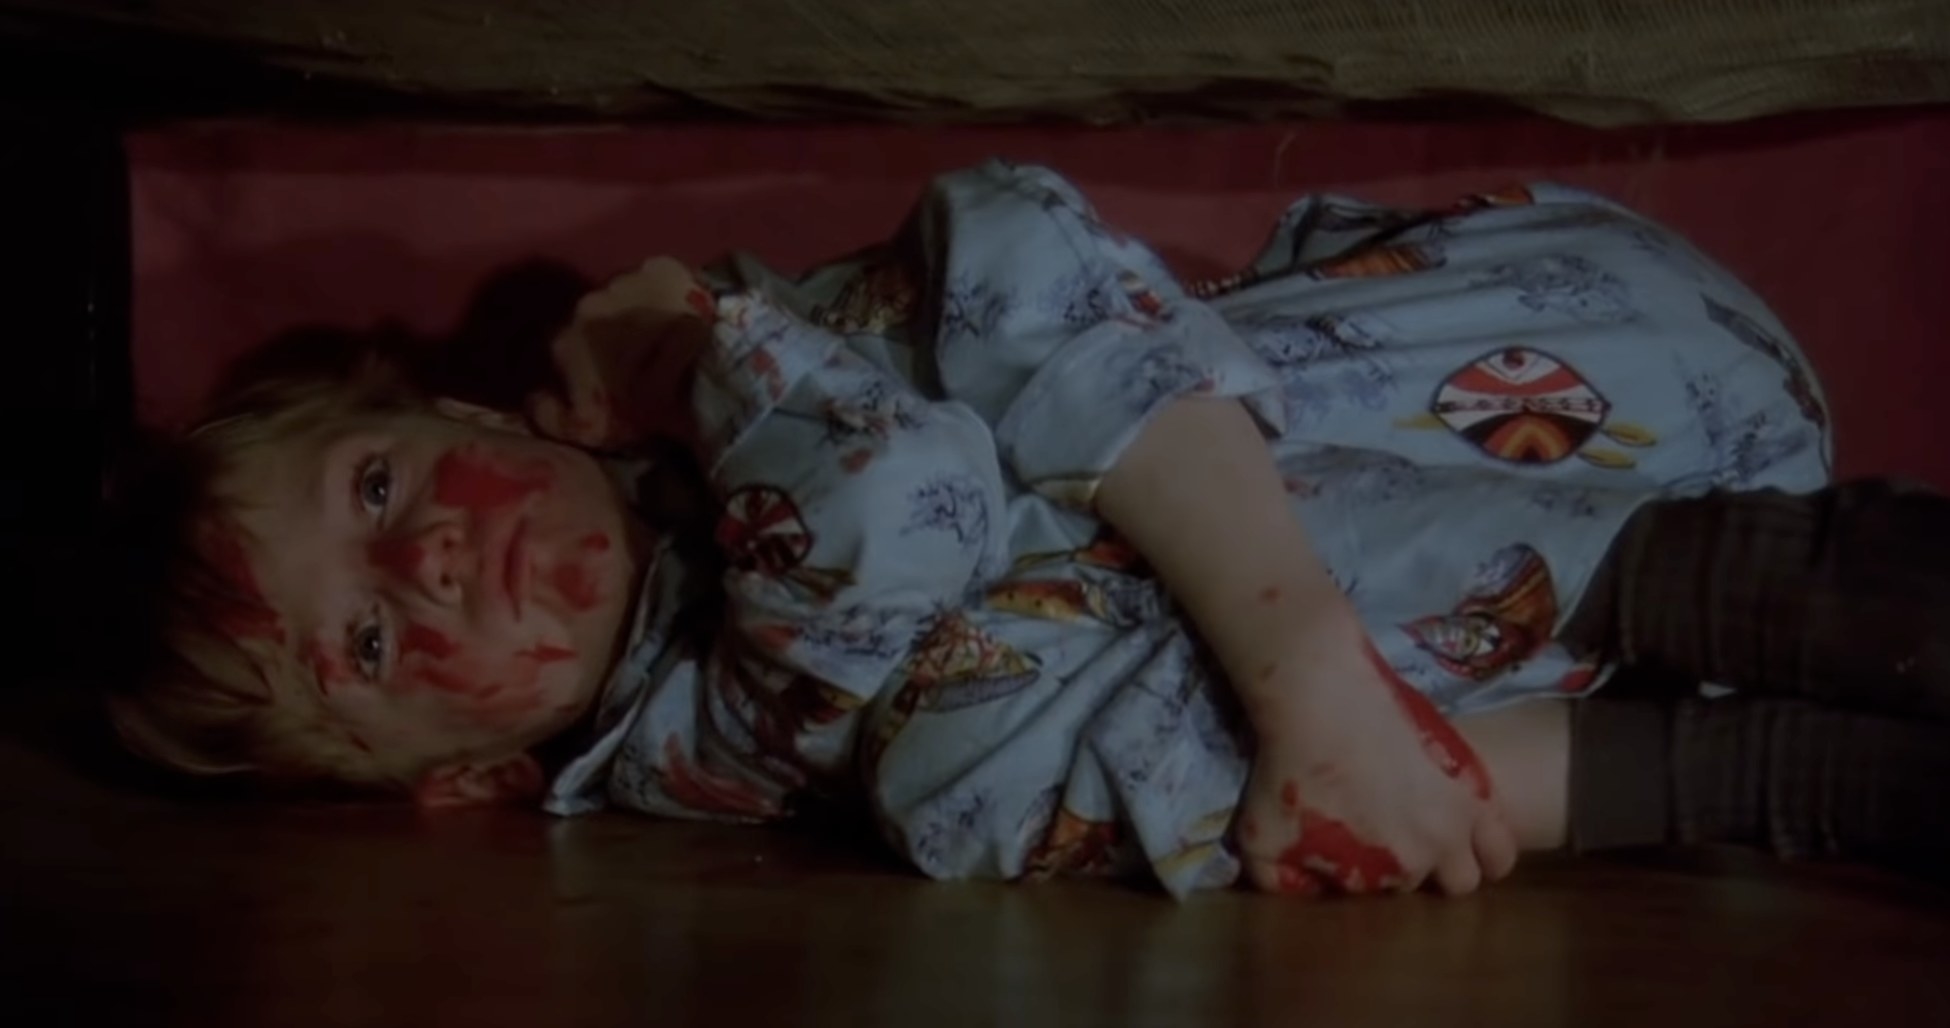 a little boy covered in blood hiding under a bed